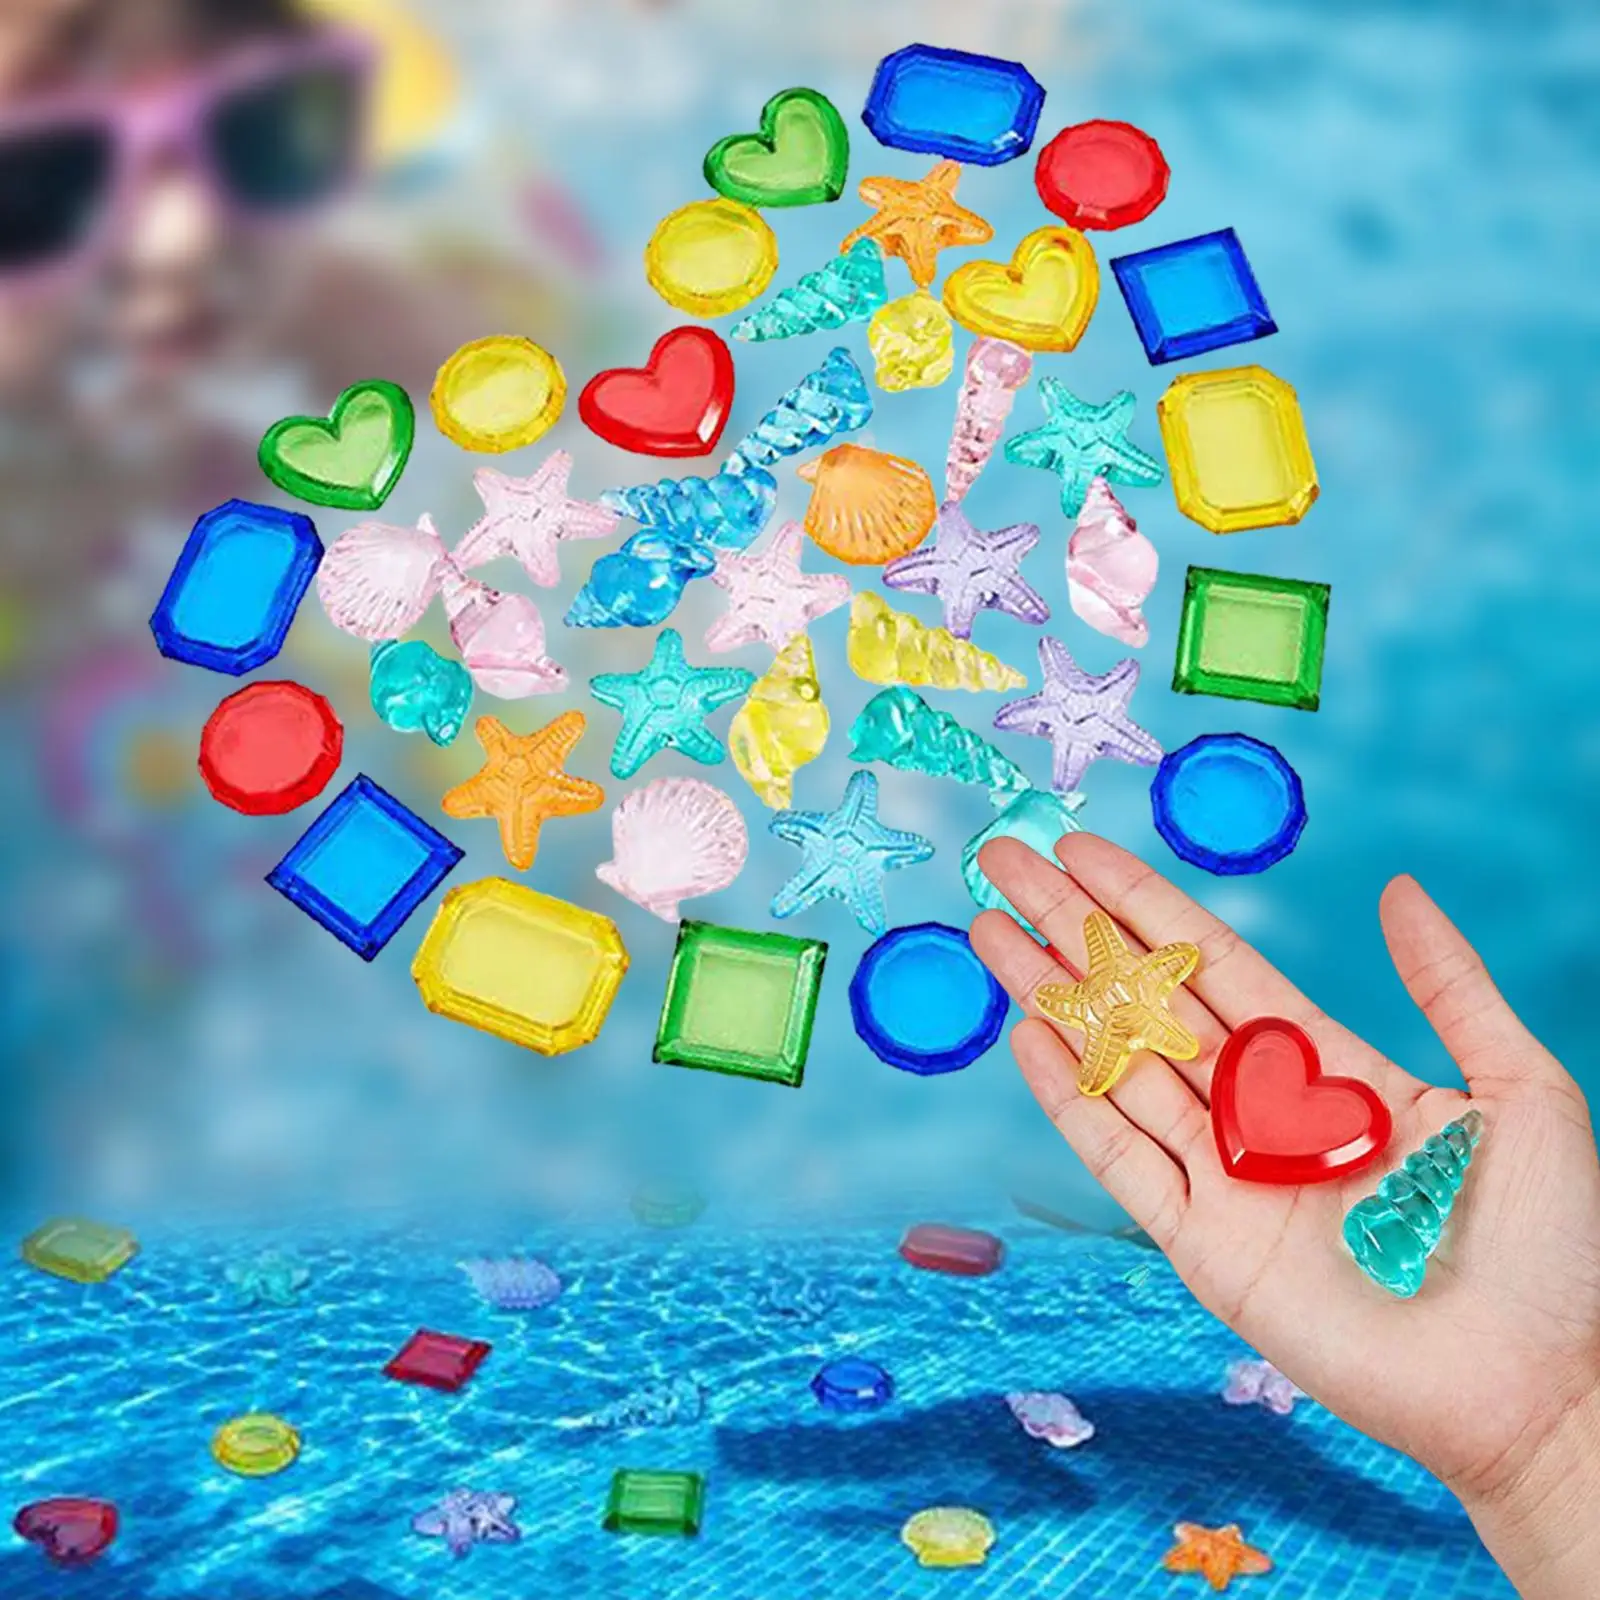 Multipurpose Dive Throw Toy Set Acrylic Motor Skill Game Gifts Decoration for Swimming Pool Learning Activities Preschool Beach